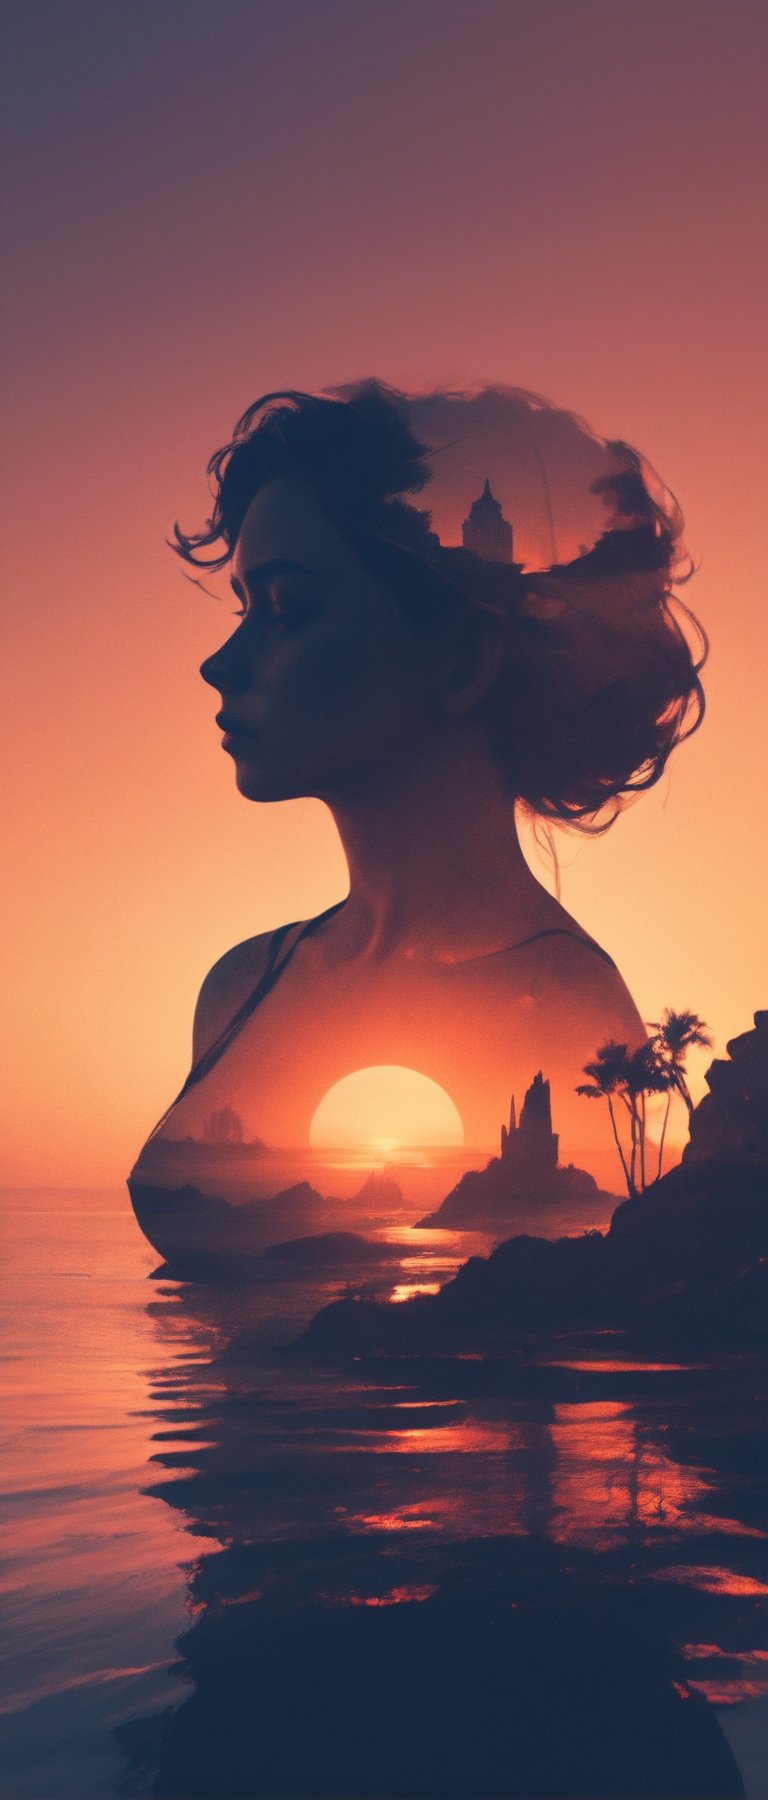 high quality, 8K Ultra HD, double exposure, beautifully designed goddess silhouette and sunset coast, minimalist, crisp lines, awesome full color,Enhanced All